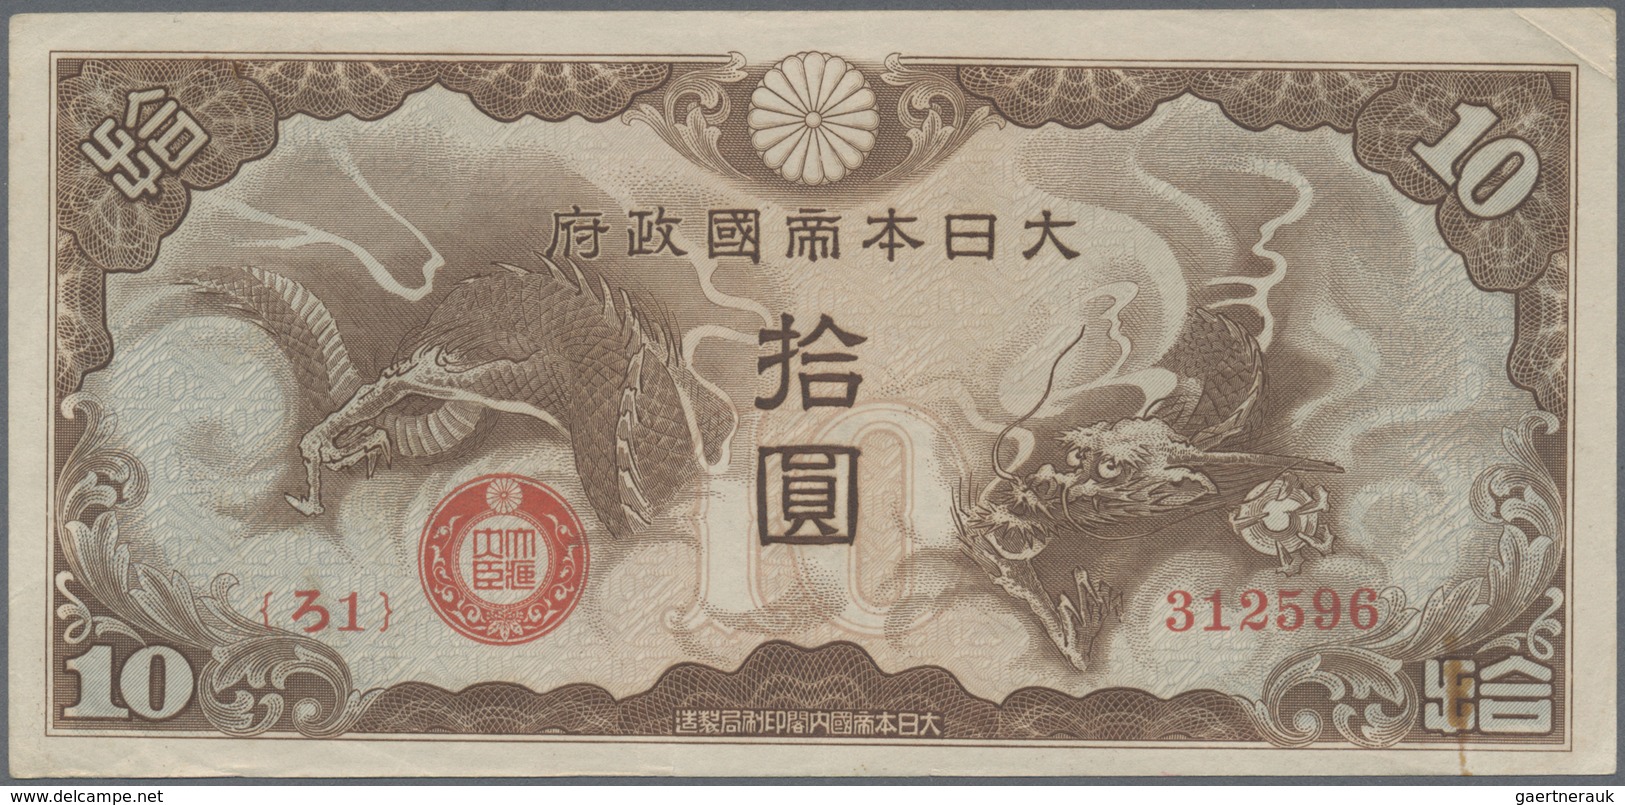 Japan: 10 Yen ND(1940) P. M4, With Serial Number, Light Folds And Stain Residuals On Back, Crispness - Japan